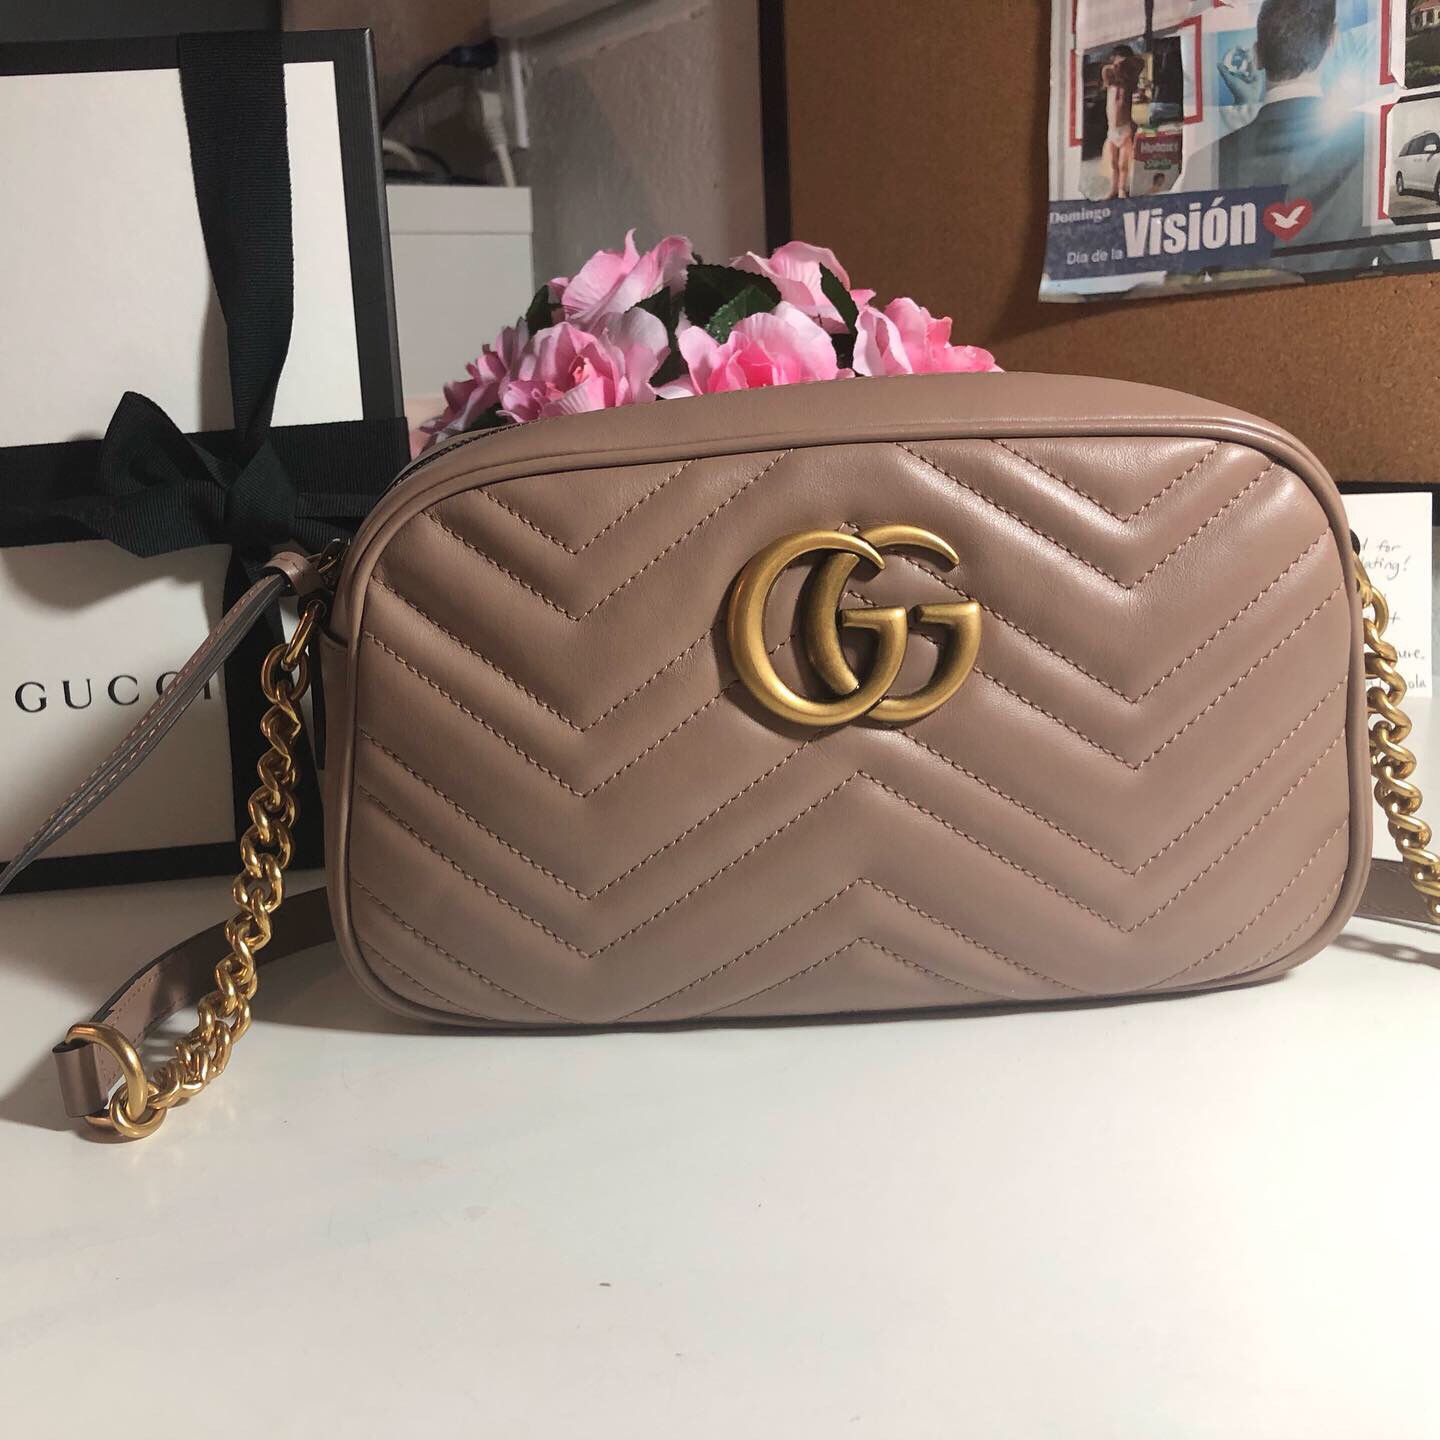 Gucci Marmont Small Camera Bag. Color Dusty Pink, it has Controllato number, dust bag, care instructions and Box. Price at the store $1,210.00 +Tax